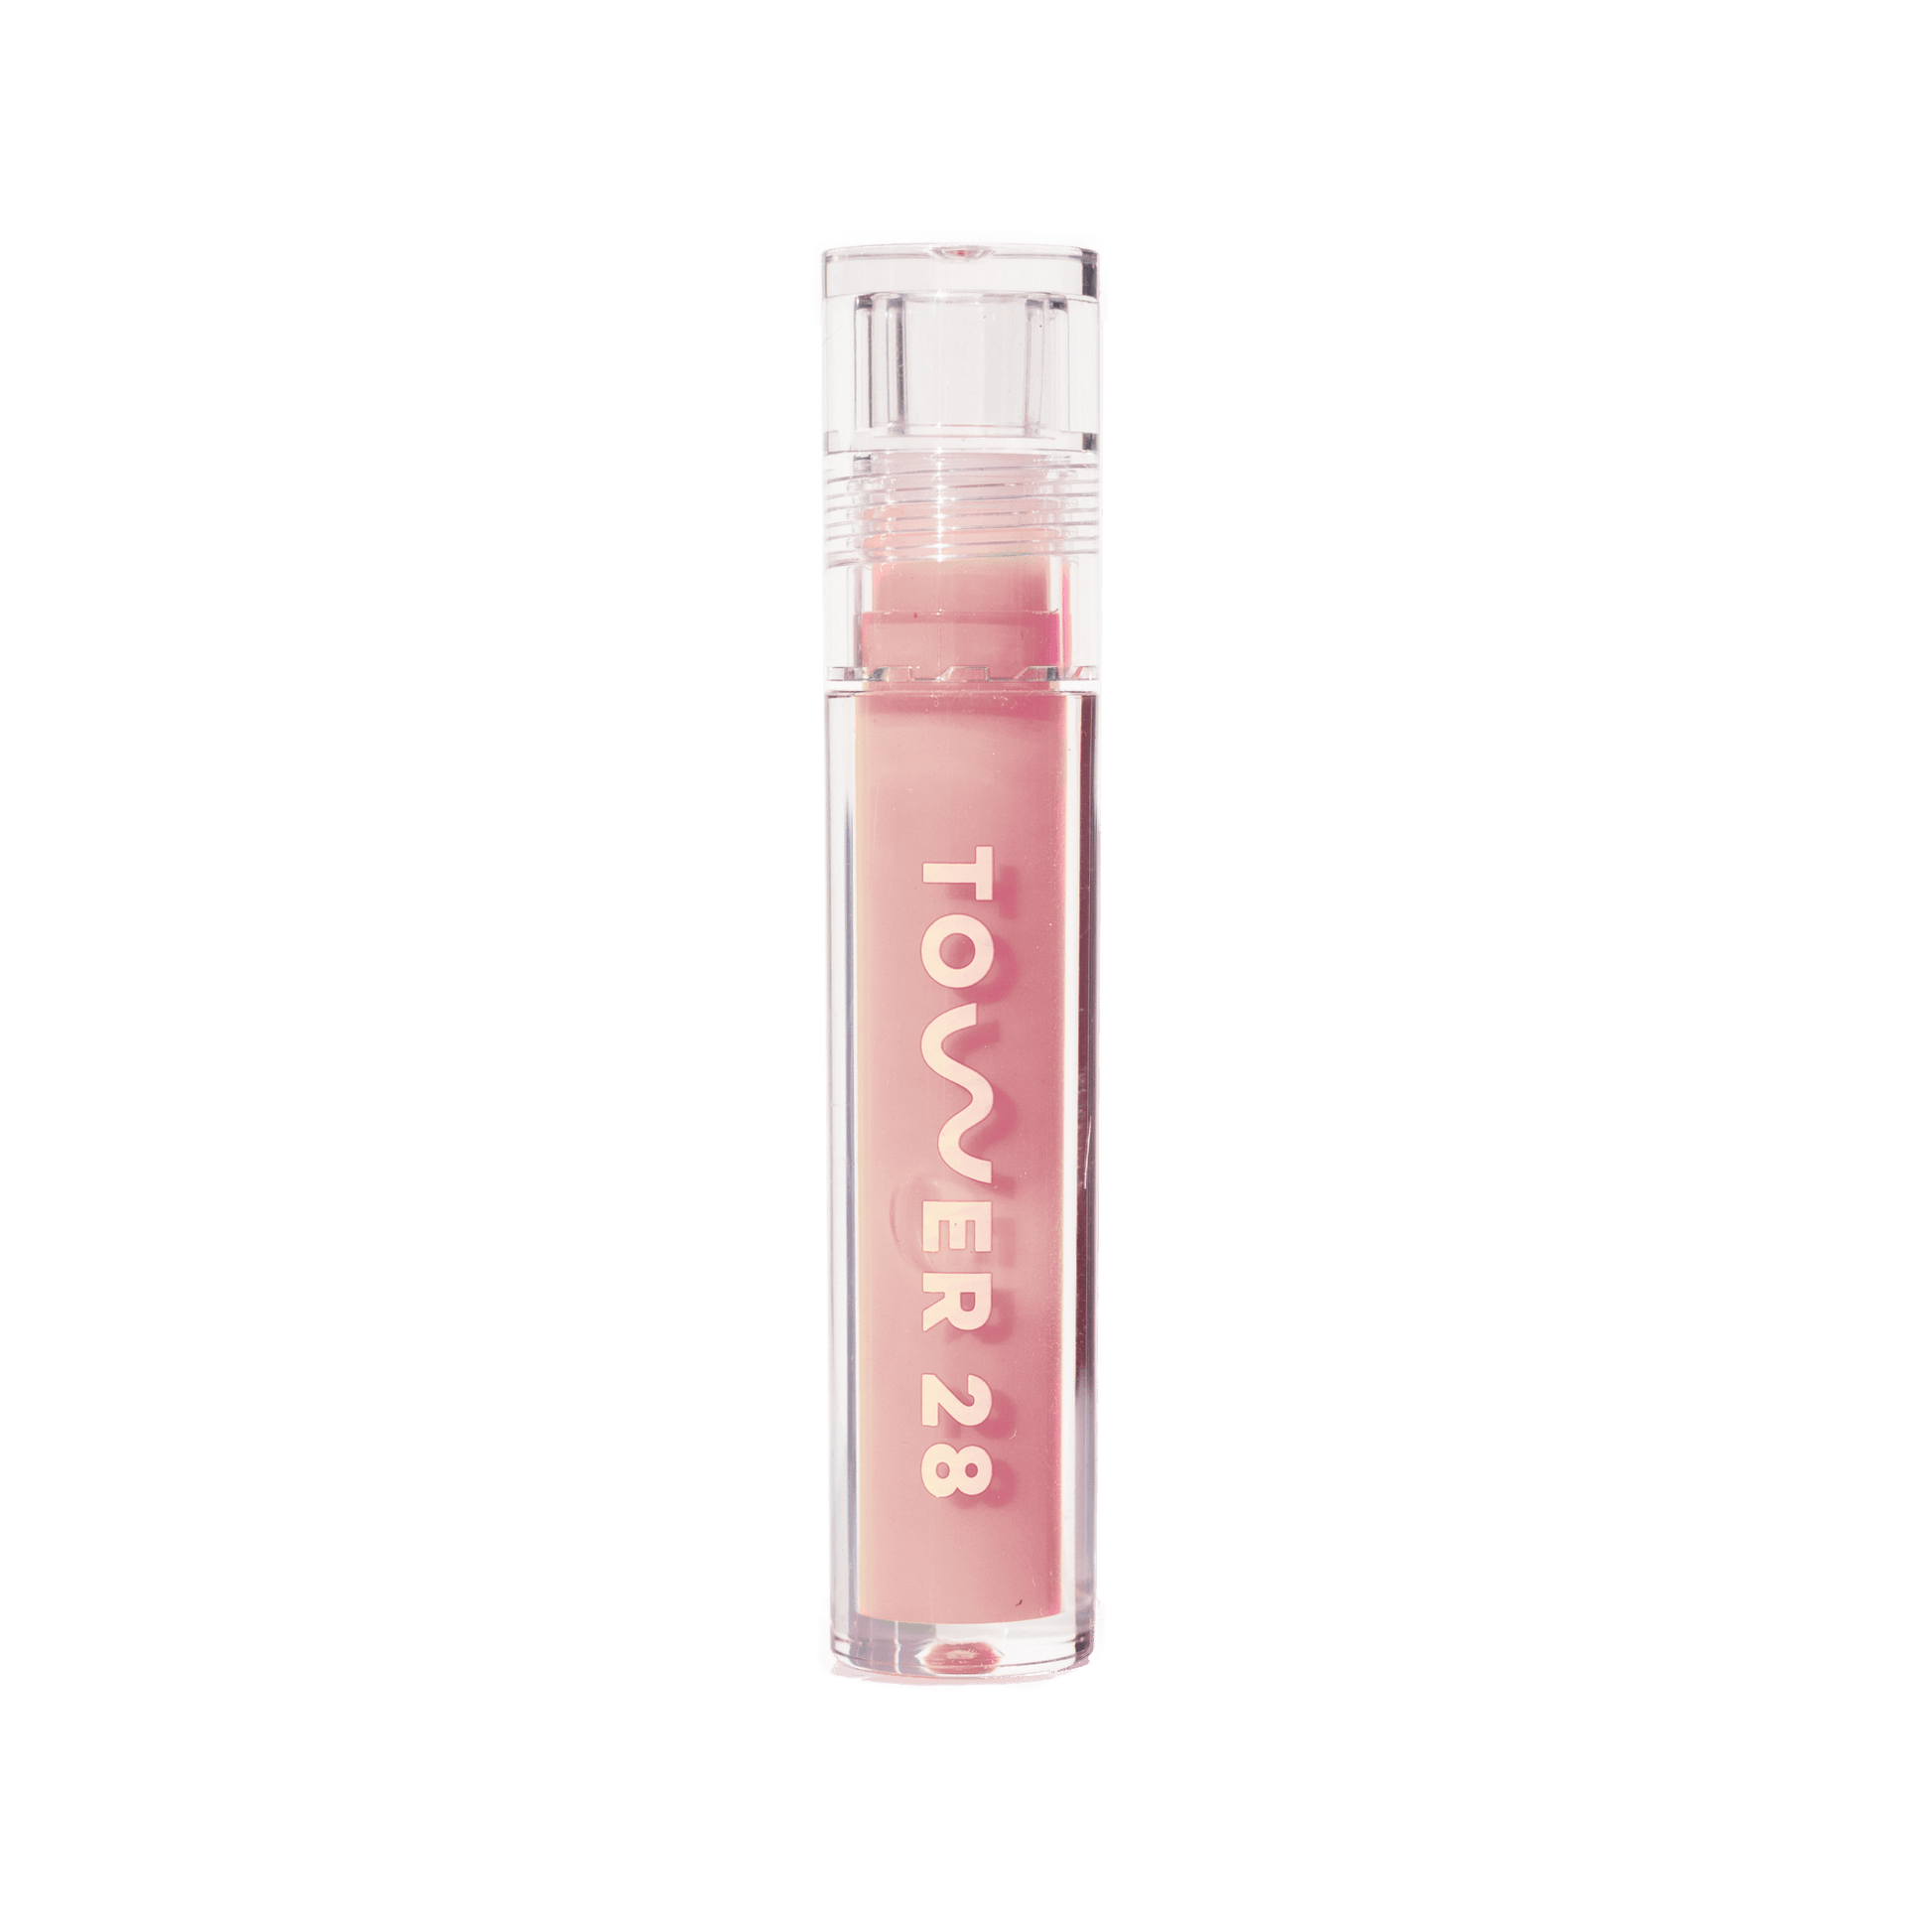 The Tower 28 Beauty ShineOn Lip Jelly in the shade Oat